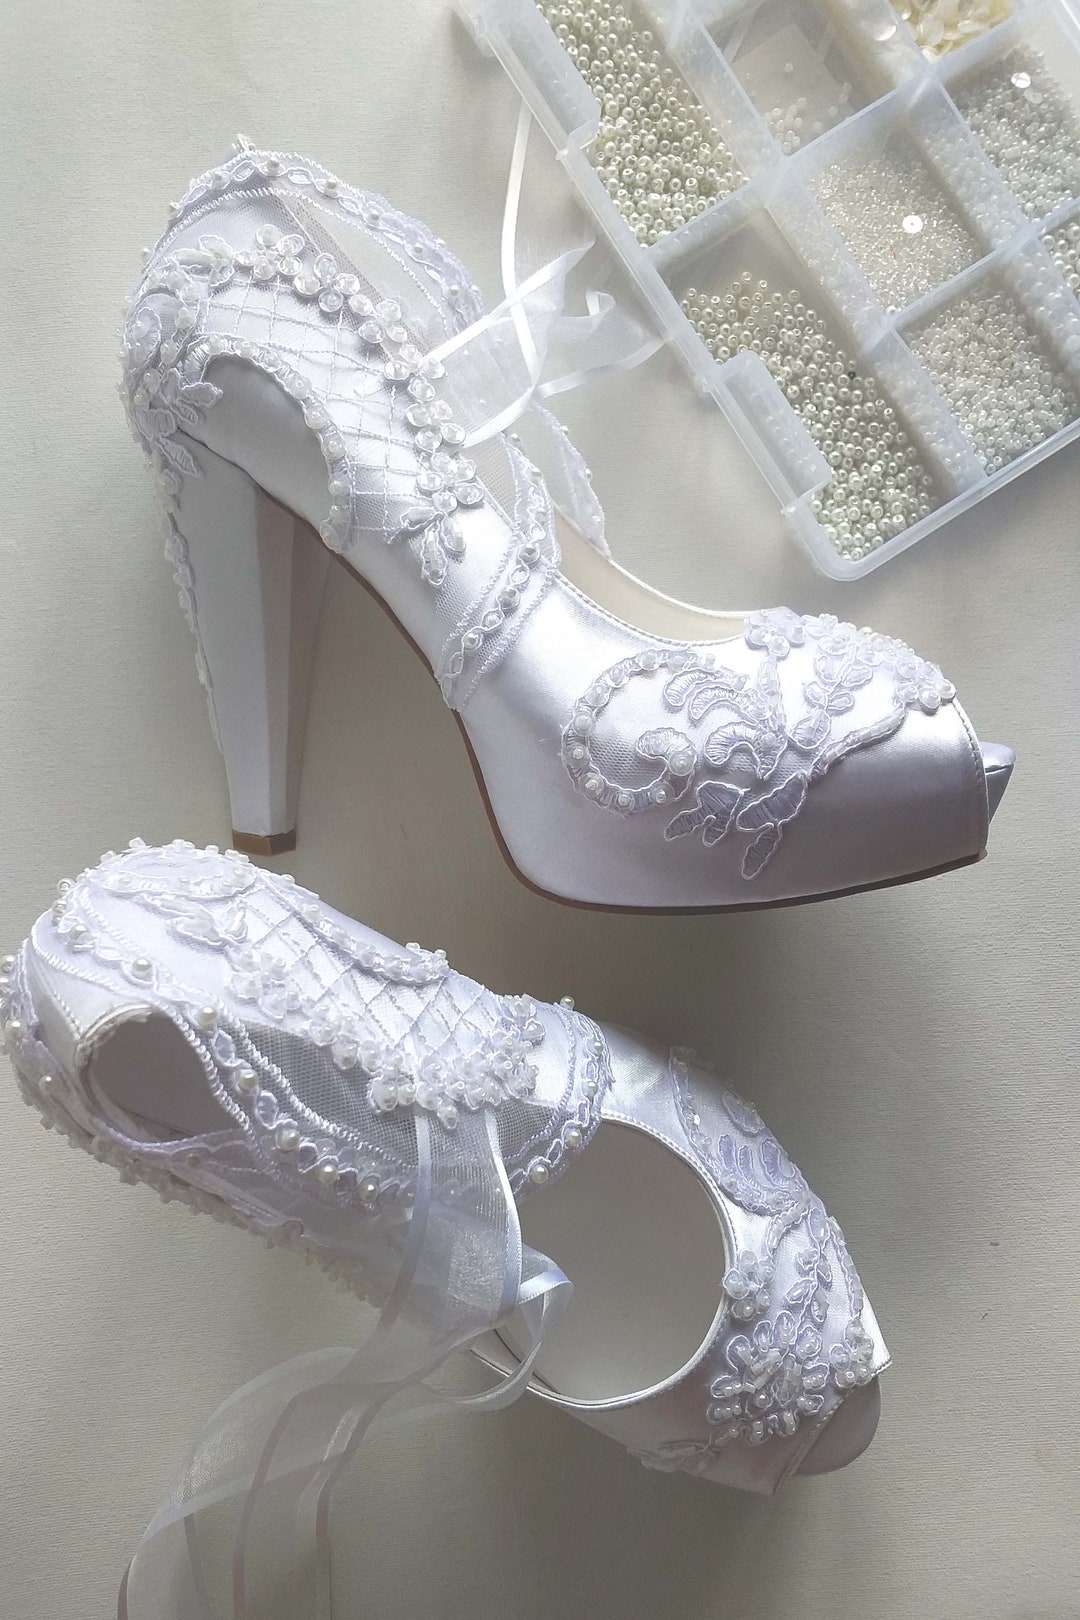 White Wedding Shoes for Bride With Pearls - Etsy